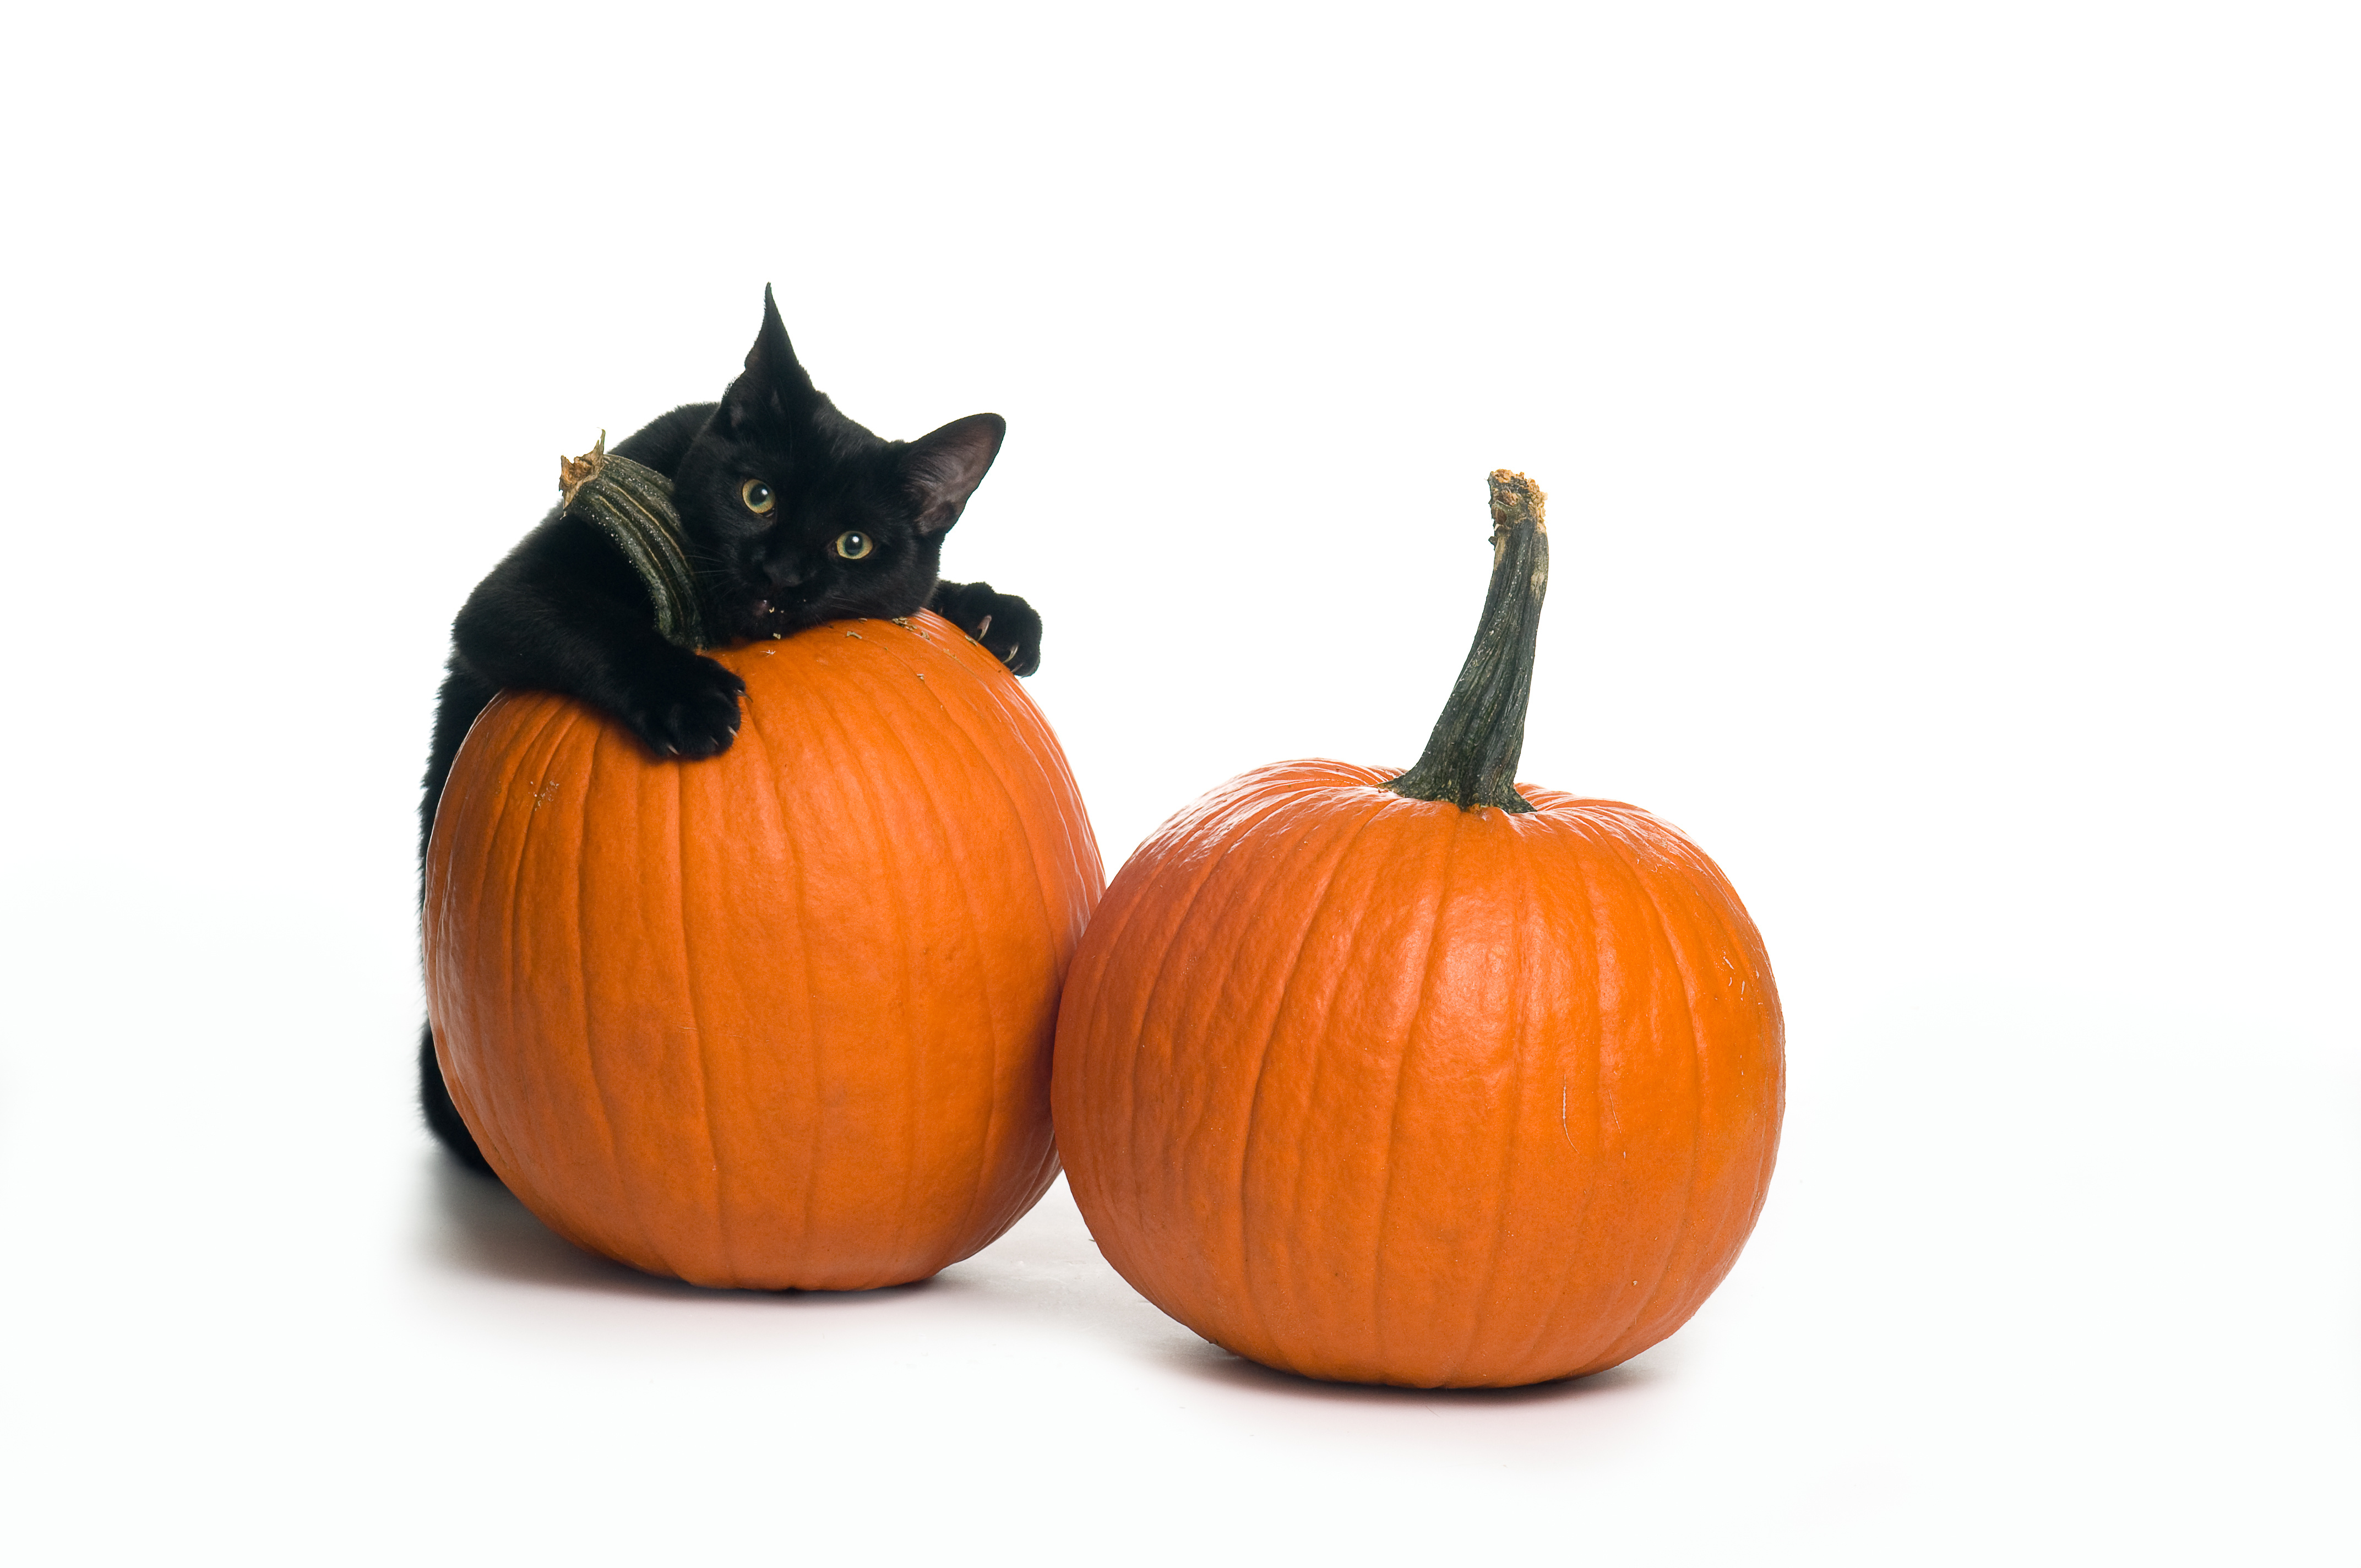 Your cat can enjoy the season's holidays with...pumpkin! Cat Tales